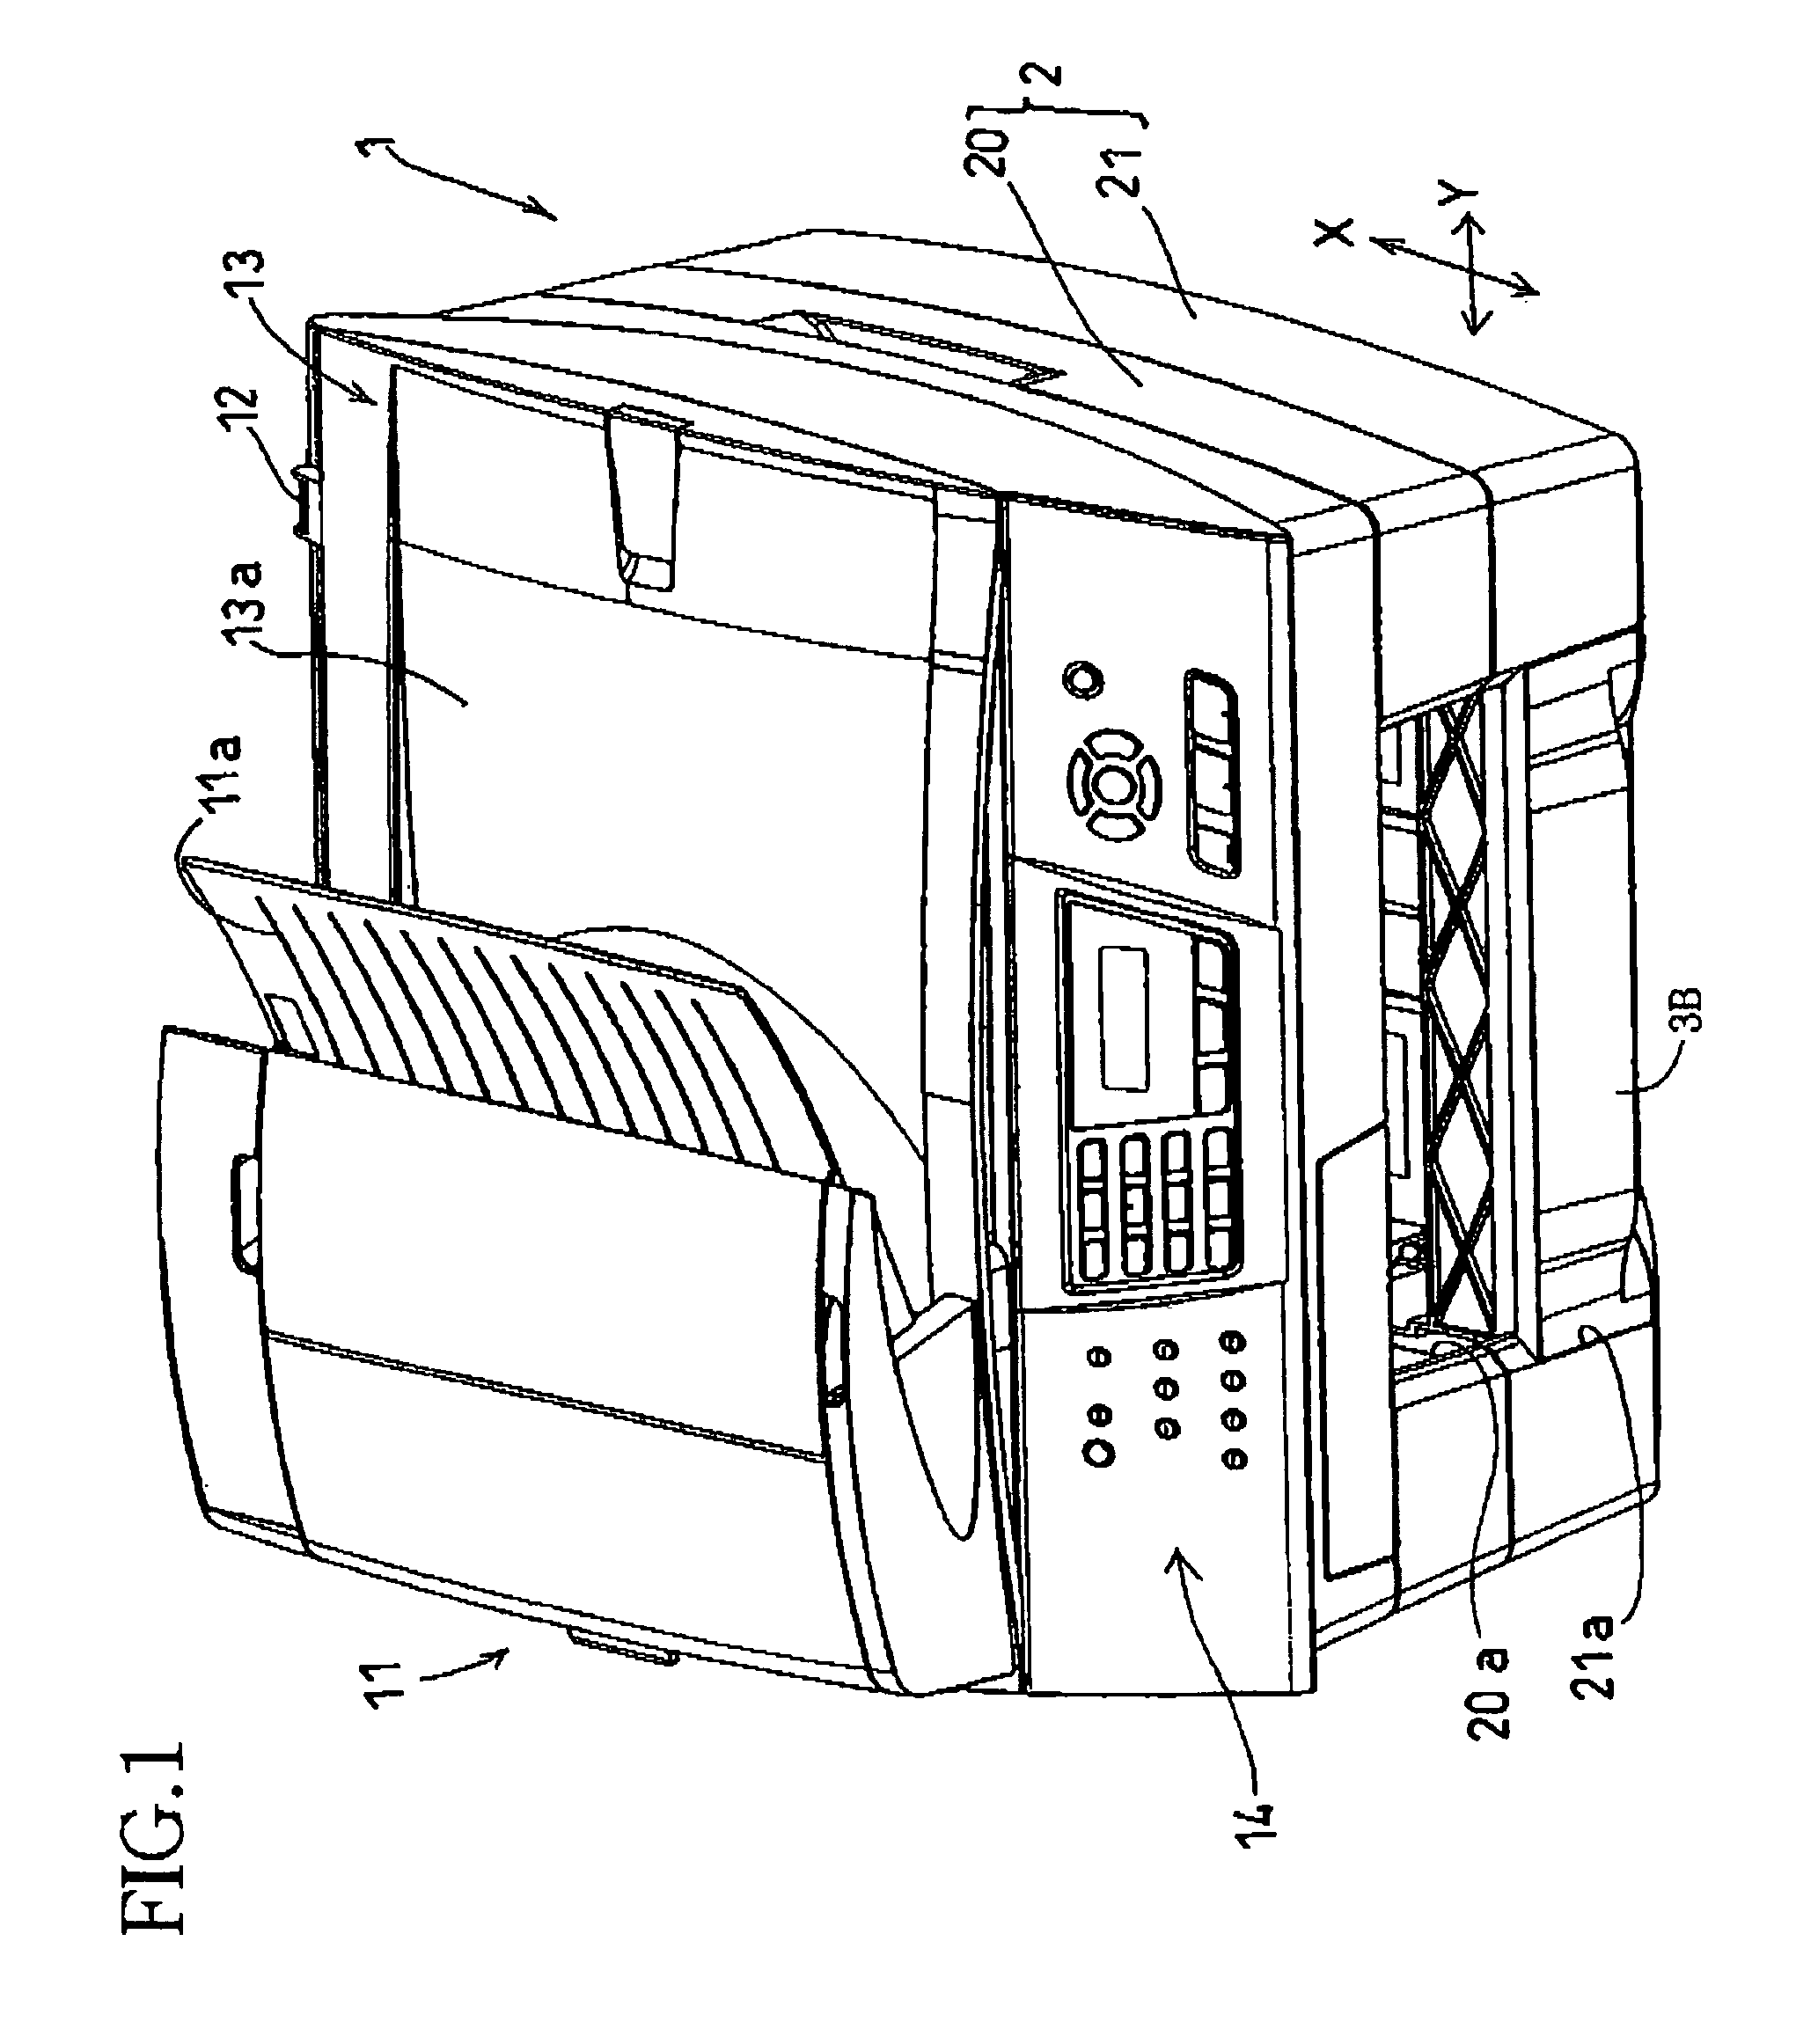 Sheet-supply cassette with an inclined separate plate, and image recording apparatus including sheet-supply cassette installed with a snap-action device